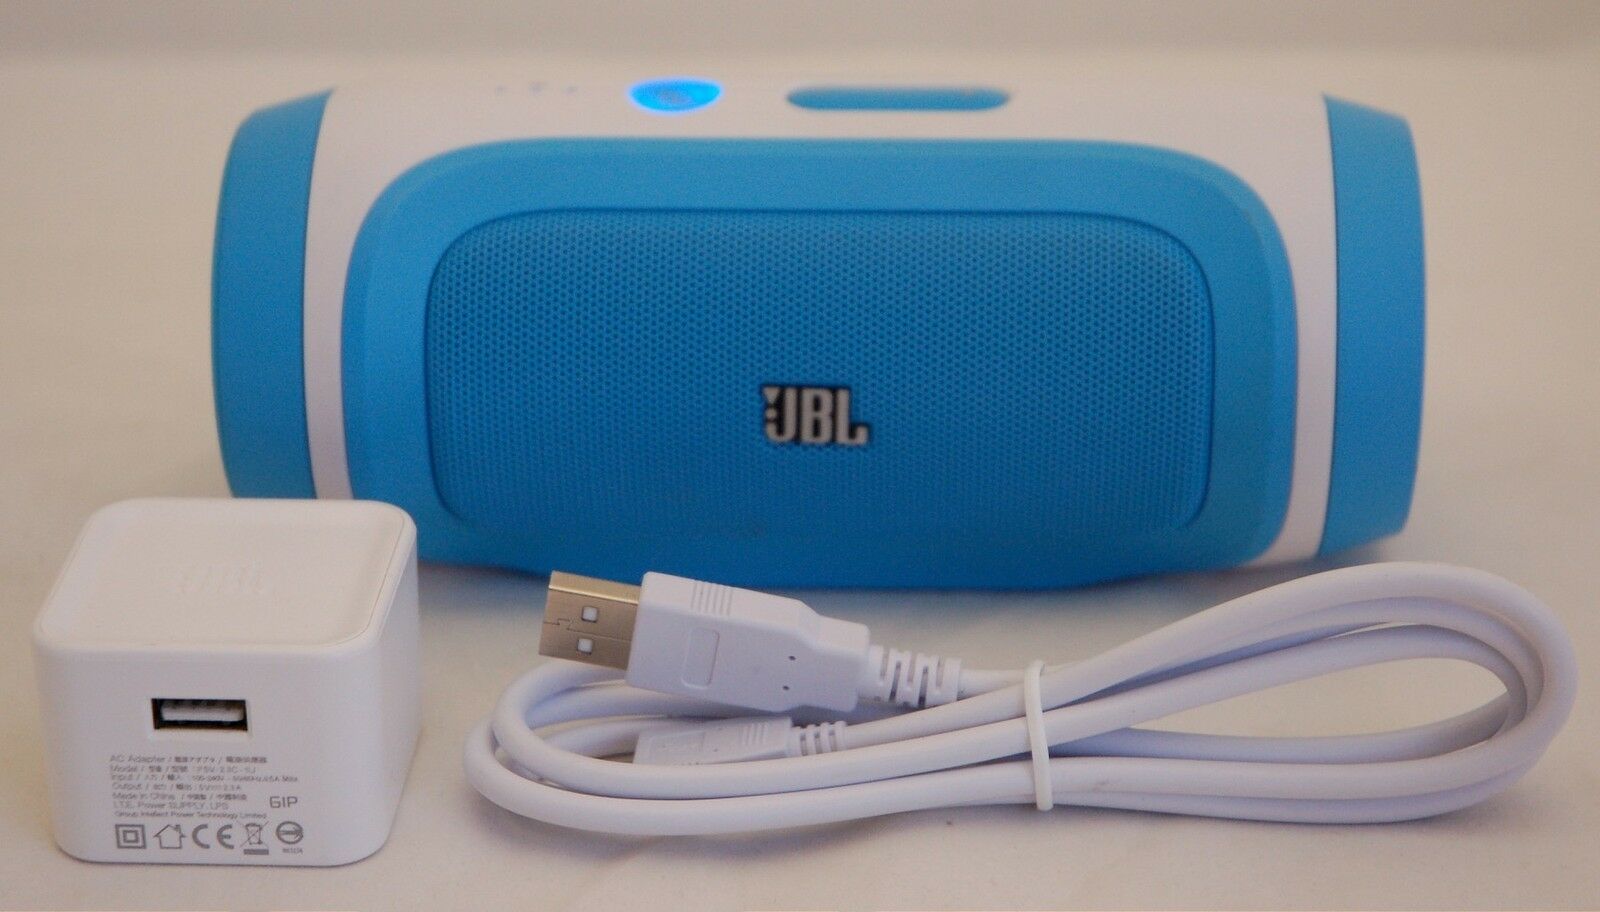 Jbl Charge Blue Stereo Wireless Bluetooth Portable Fun Speaker Iphone 7+/7/6s C